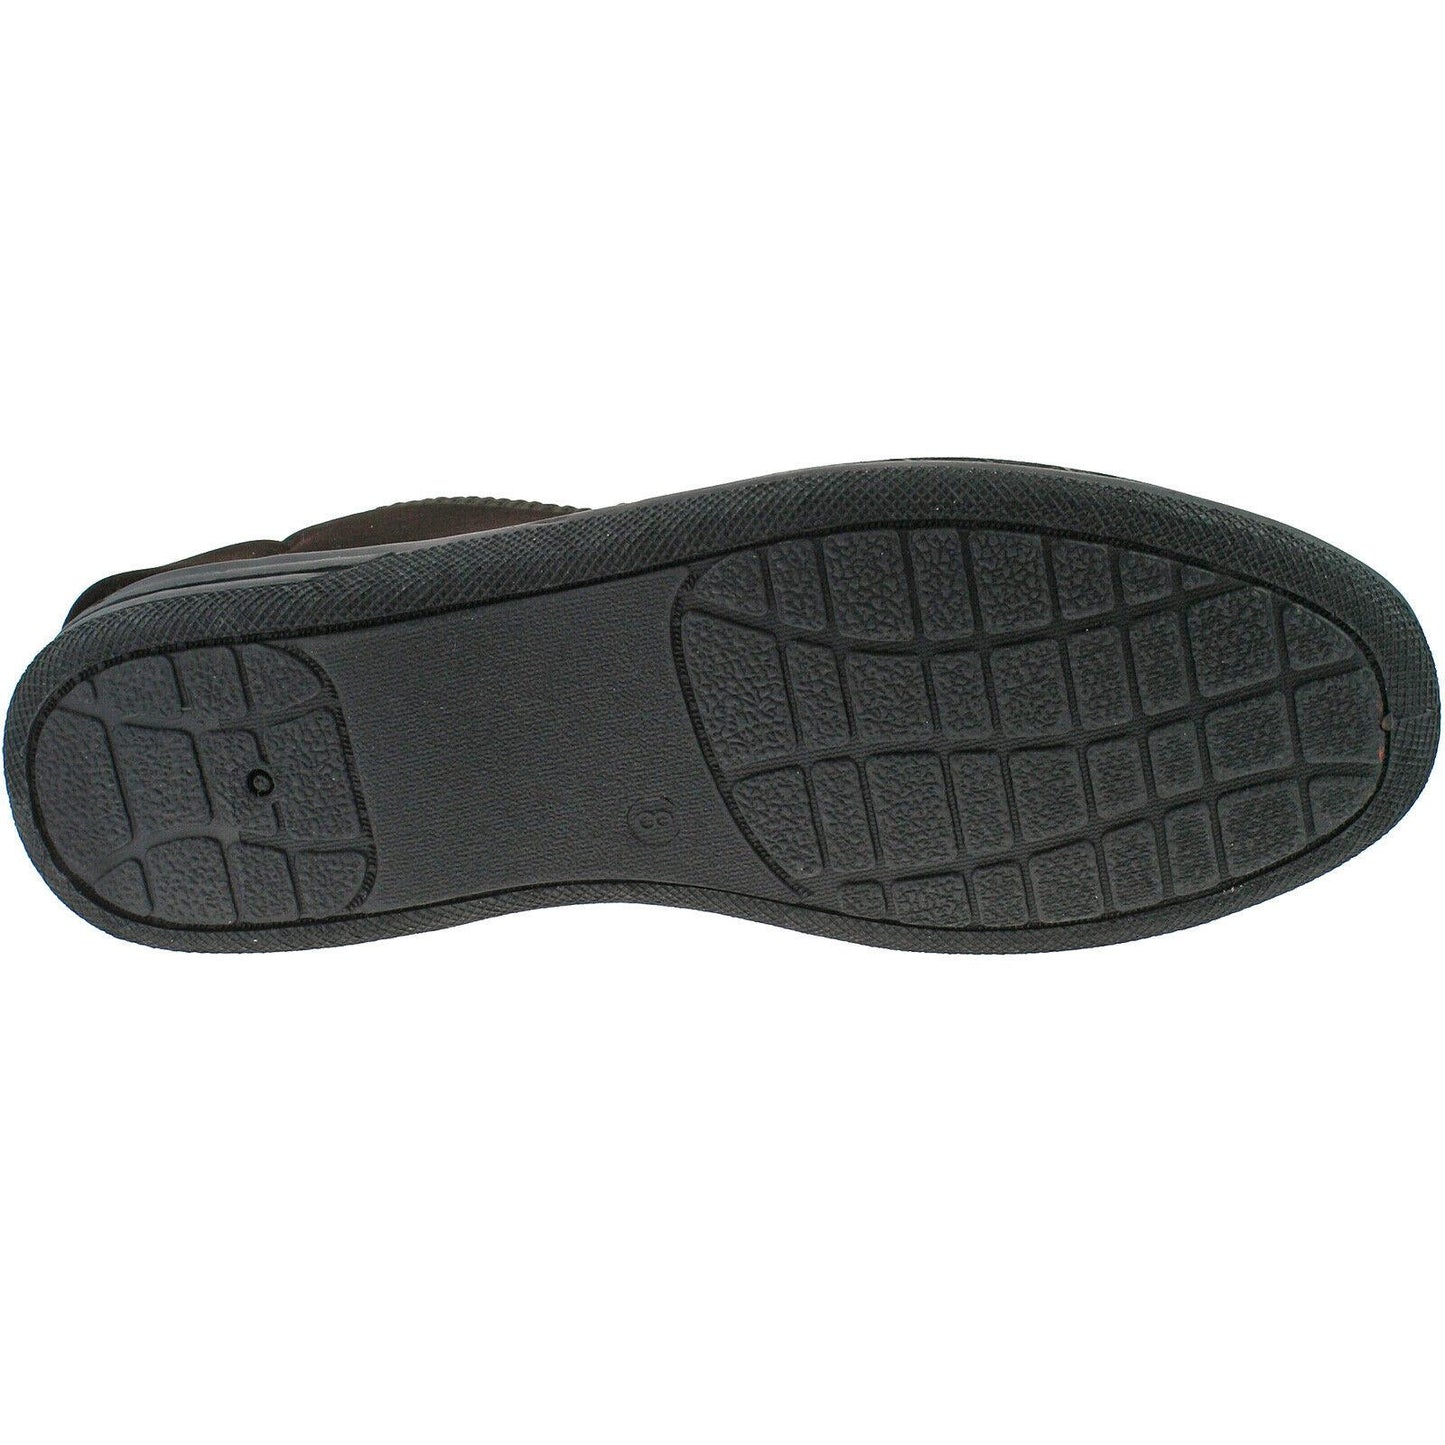 Mens Zedzzz Warm Lined Velour Double Gusset Full Slippers Black Brown MS466